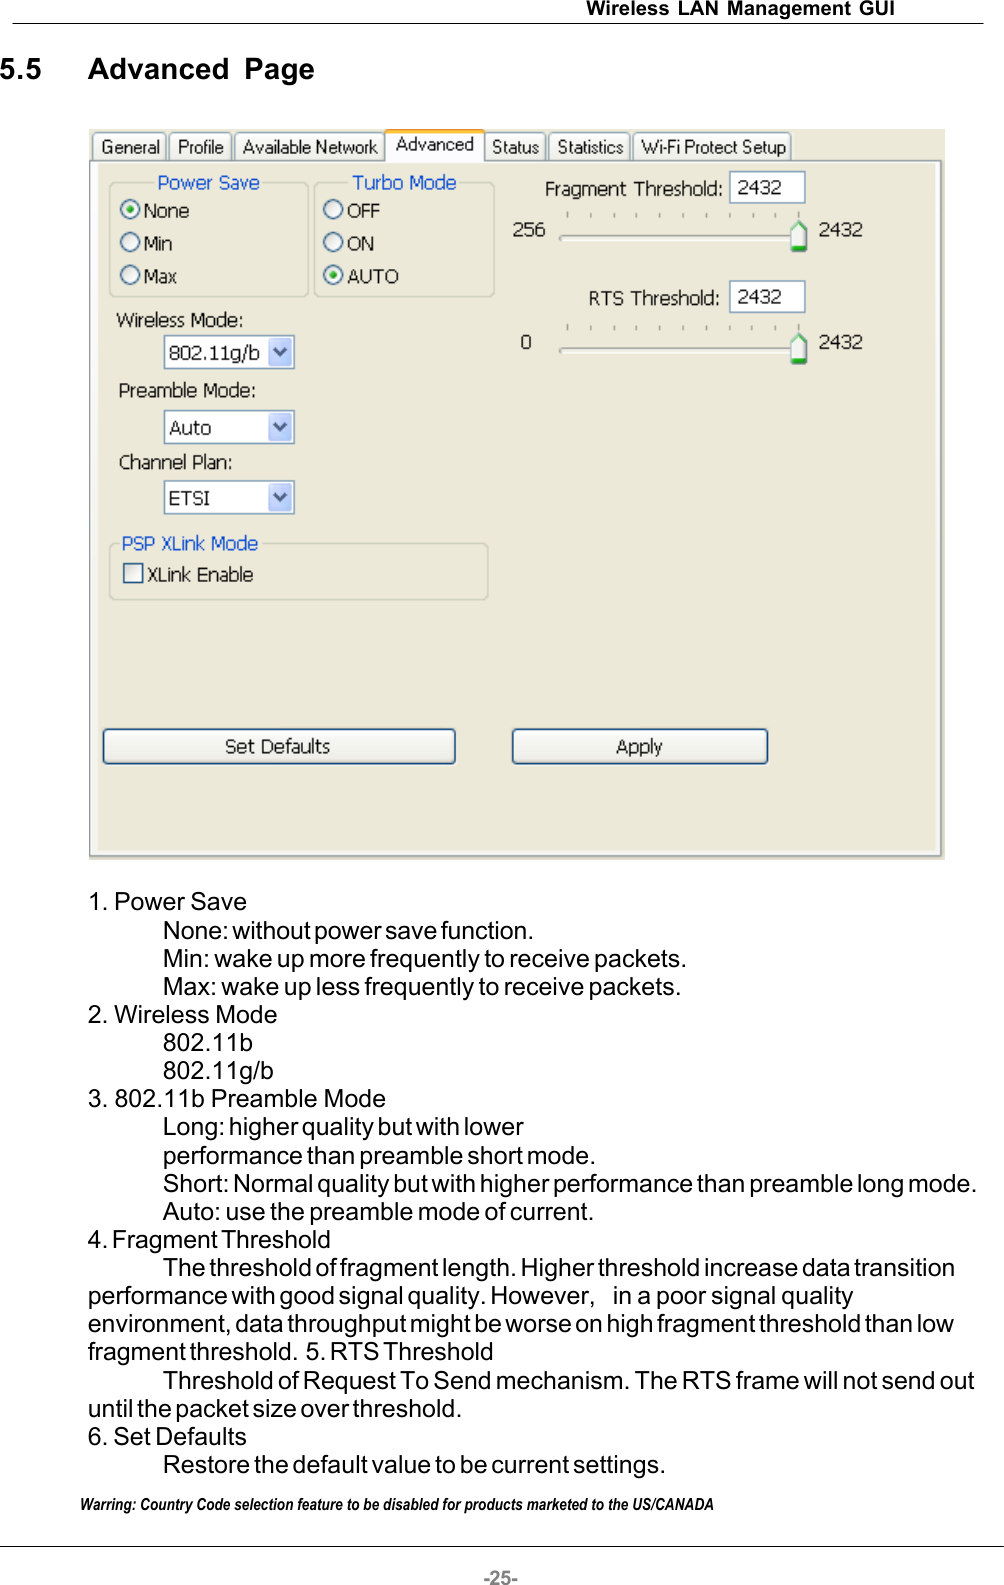 Wireless LAN Management GUI-25-5.5 Advanced Page1. Power SaveNone: without power save function.Min: wake up more frequently to receive packets.Max: wake up less frequently to receive packets.2. Wireless Mode802.11b802.11g/b3. 802.11b Preamble ModeLong: higher quality but with lowerperformance than preamble short mode.Short: Normal quality but with higher performance than preamble long mode.Auto: use the preamble mode of current.4. Fragment ThresholdThe threshold of fragment length. Higher threshold increase data transitionperformance with good signal quality. However,  in a poor signal qualityenvironment, data throughput might be worse on high fragment threshold than lowfragment threshold.  5. RTS ThresholdThreshold of Request To Send mechanism. The RTS frame will not send outuntil the packet size over threshold. 6. Set DefaultsRestore the default value to be current settings.Warring: Country Code selection feature to be disabled for products marketed to the US/CANADA